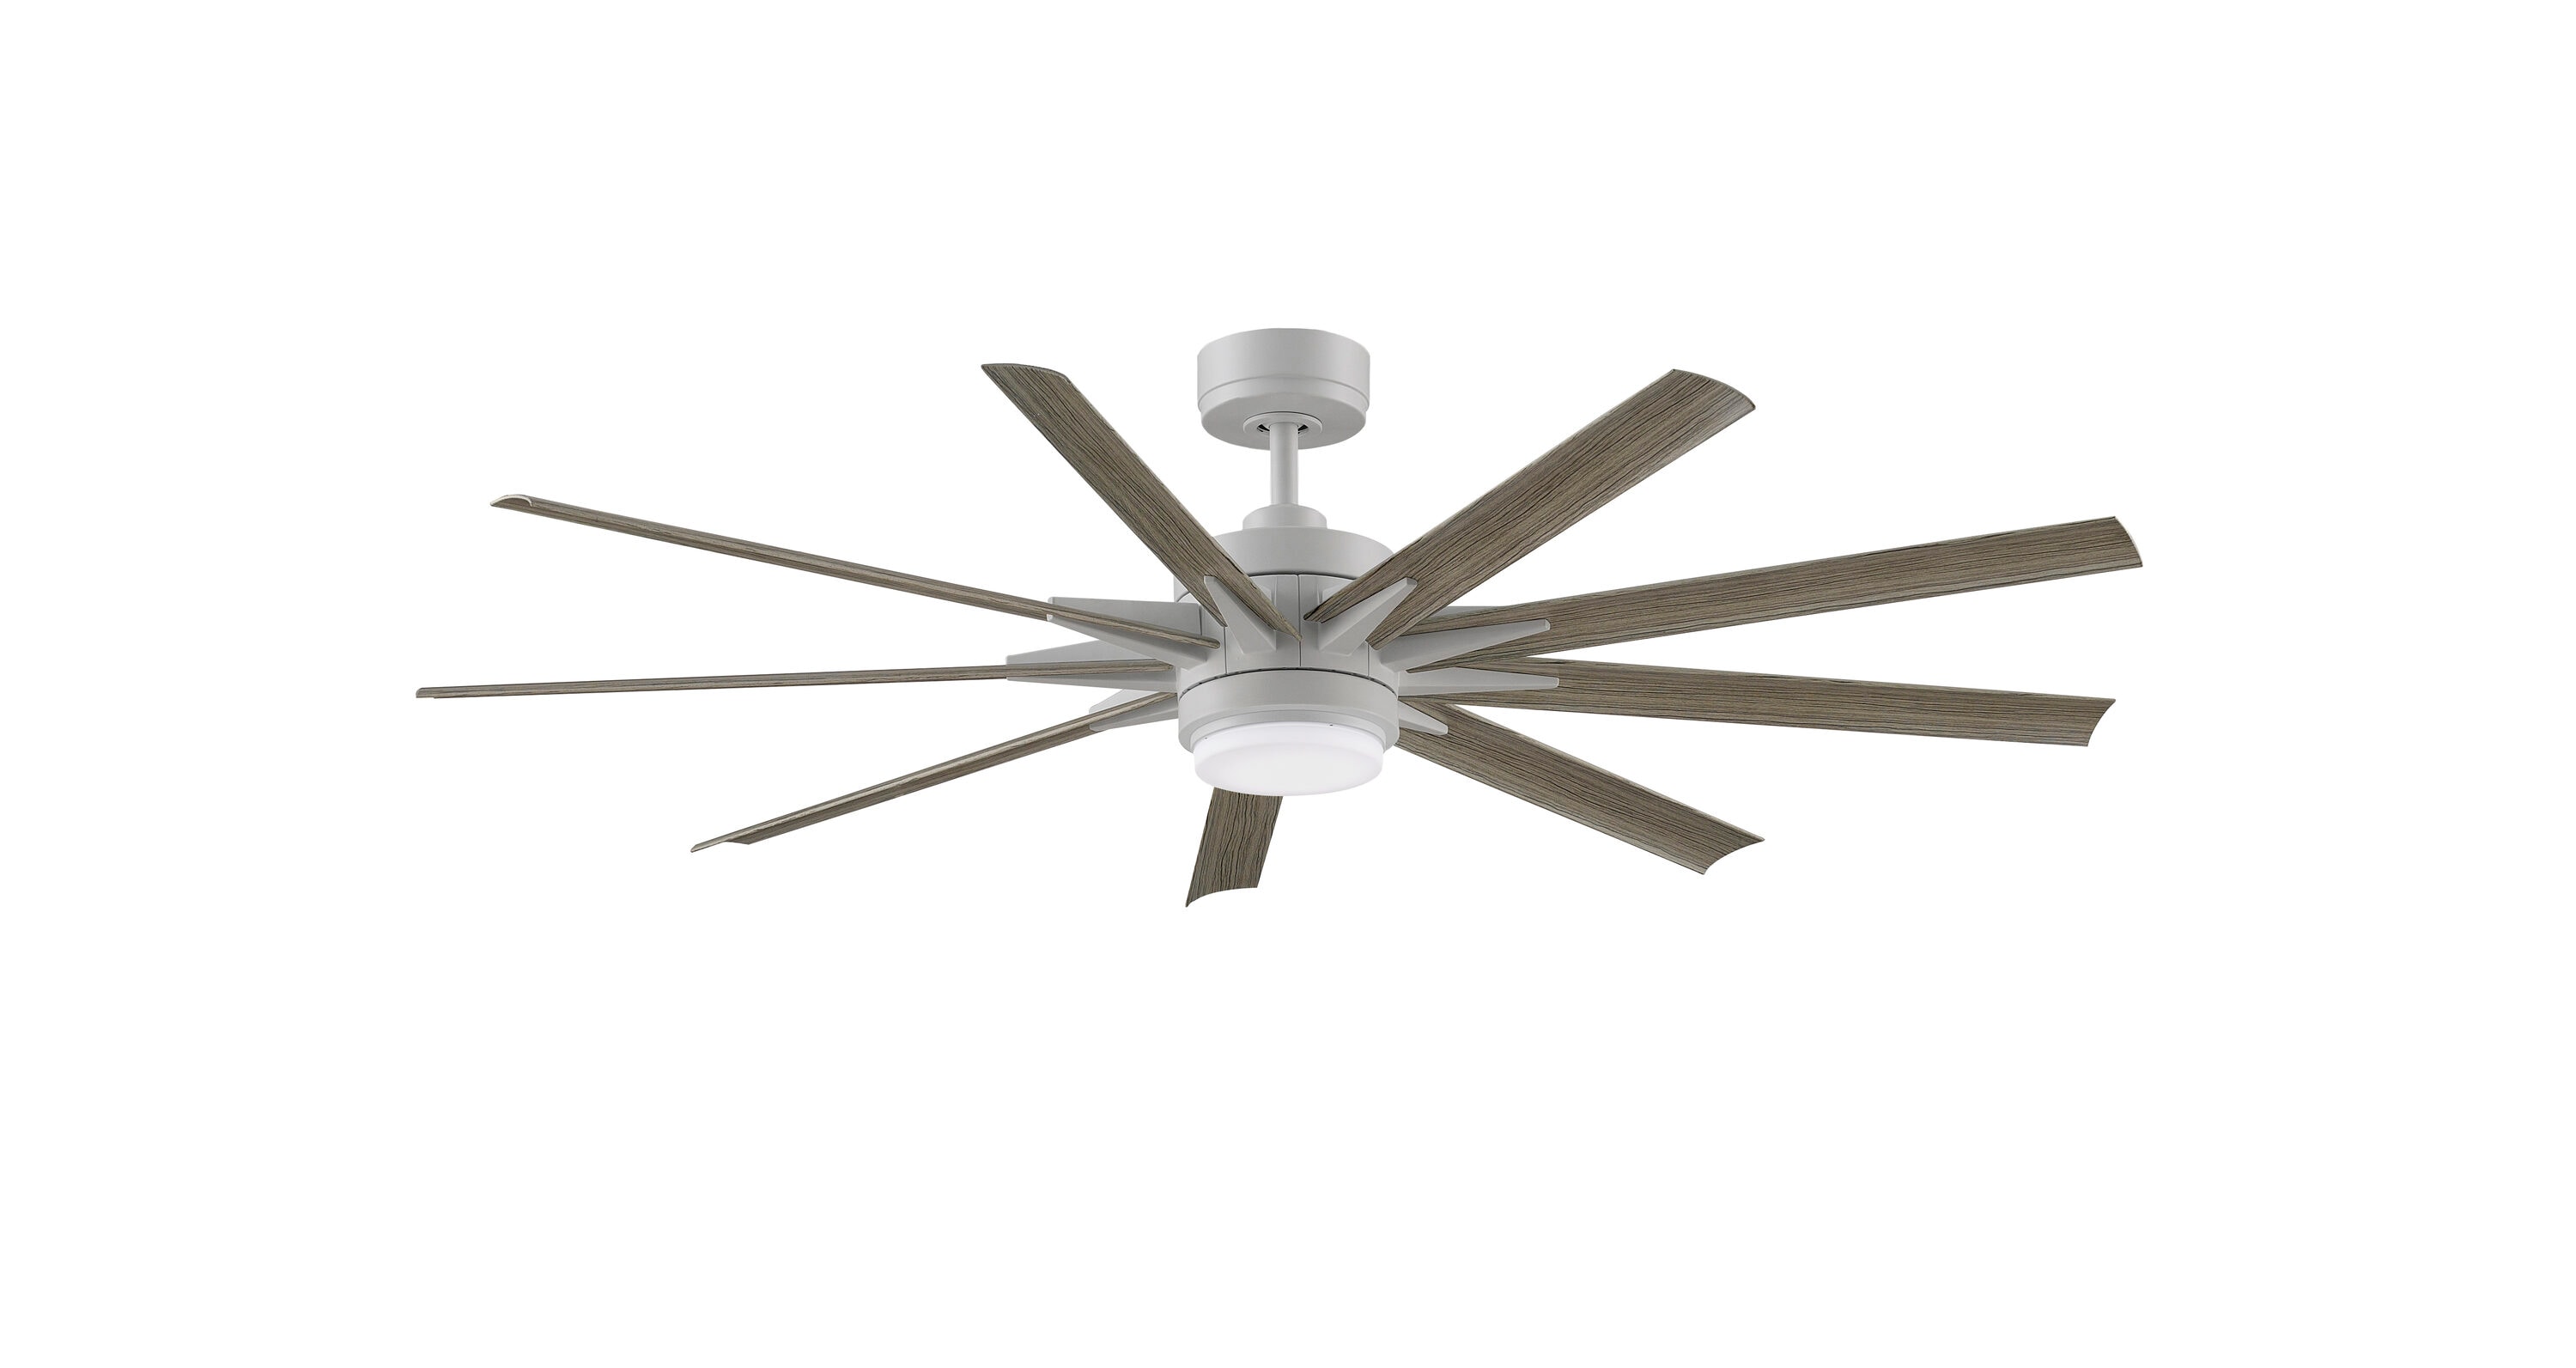 Odyn Custom 64-in Matte White Color-changing LED Indoor/Outdoor Smart Ceiling Fan with Light Remote (9-Blade) Walnut | - Fanimation FPD8152MWW-64WEW